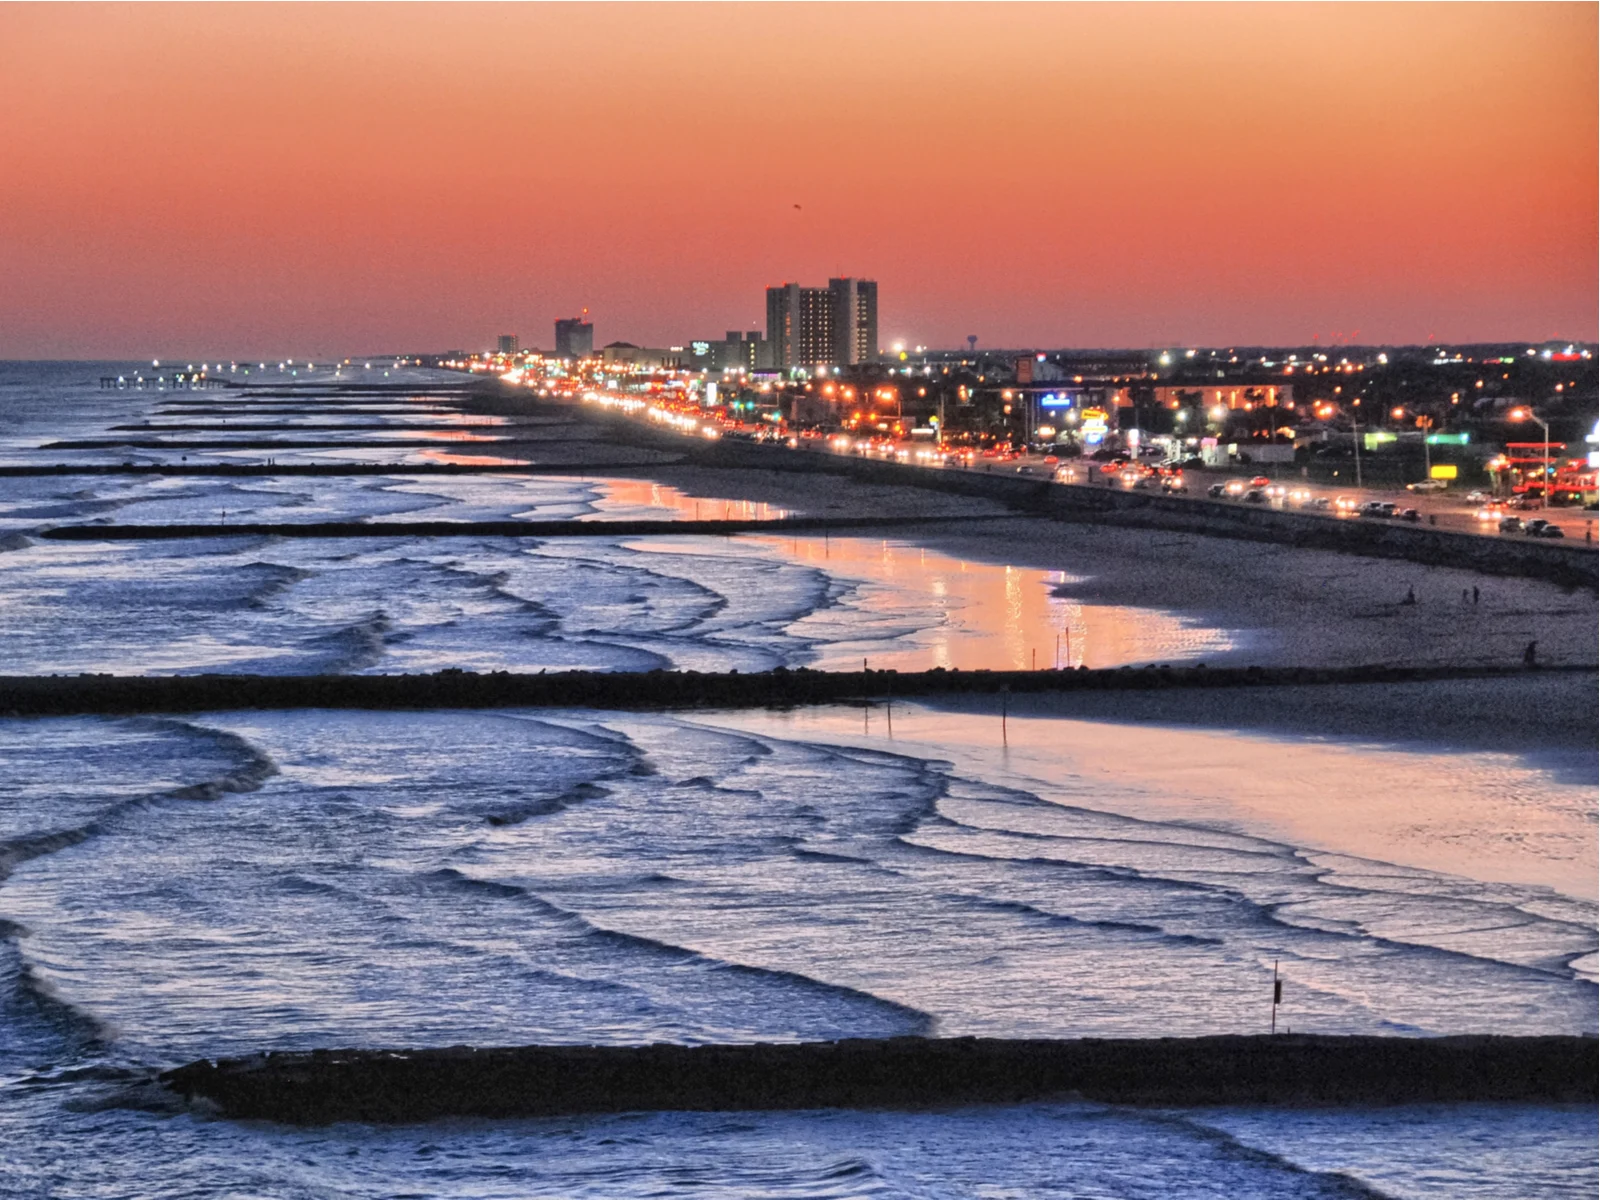 Galveston, one of the must-see attractions in Houston, pictured at dawn